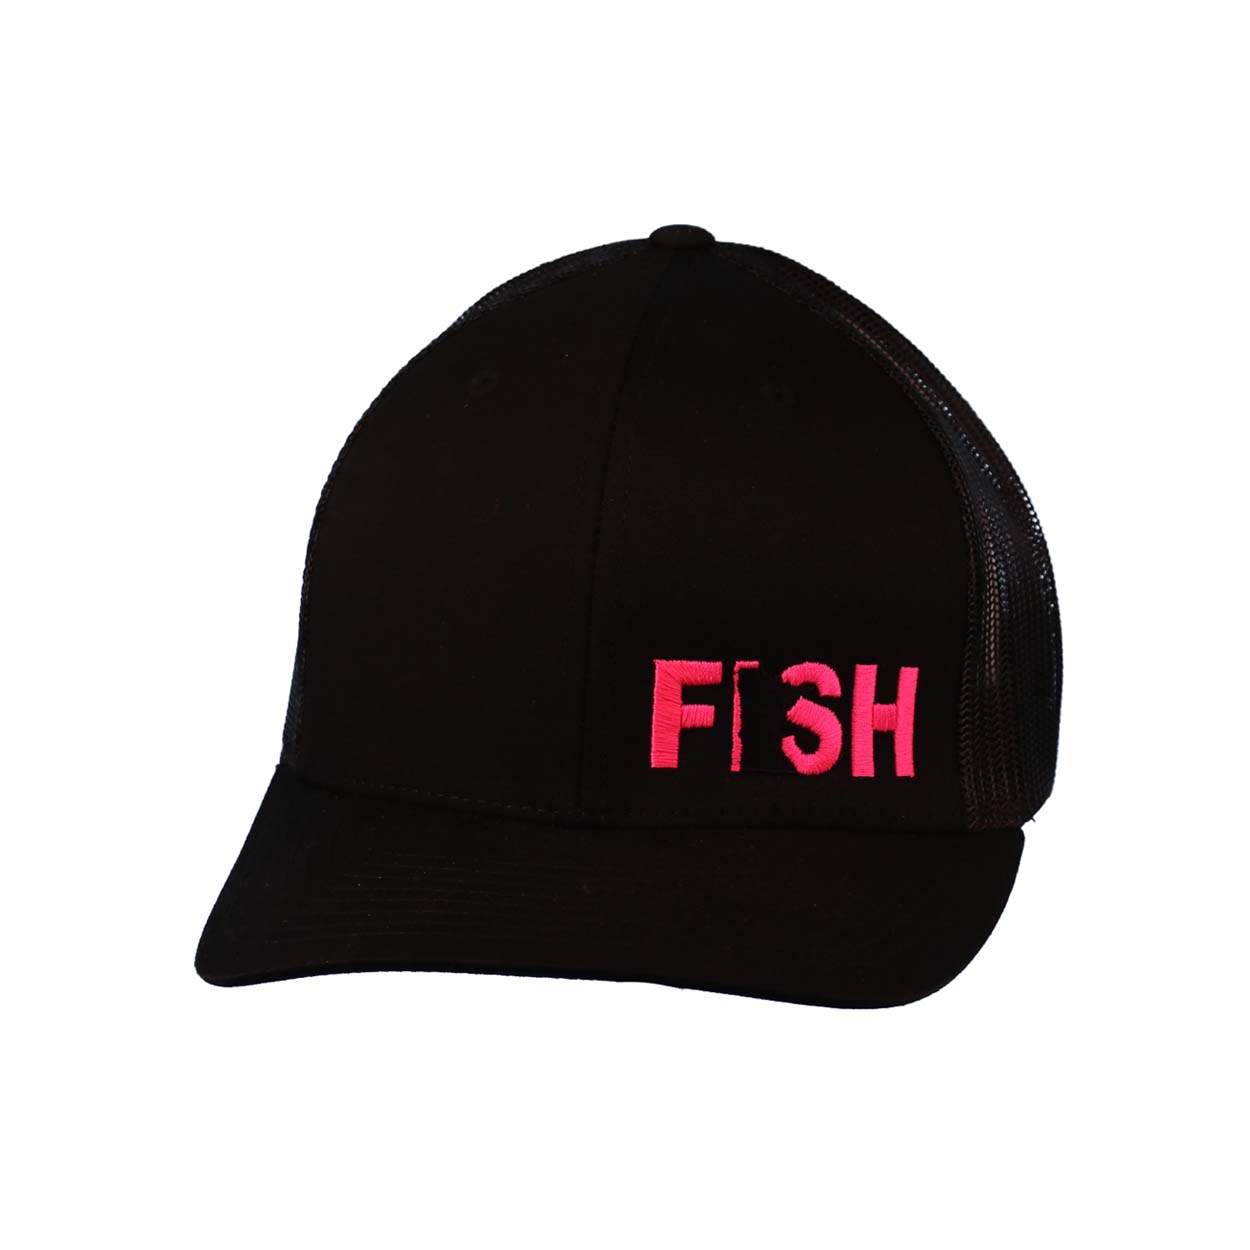 Fish Minnesota Night Out Embroidered Snapback Trucker Hat Black/Pink